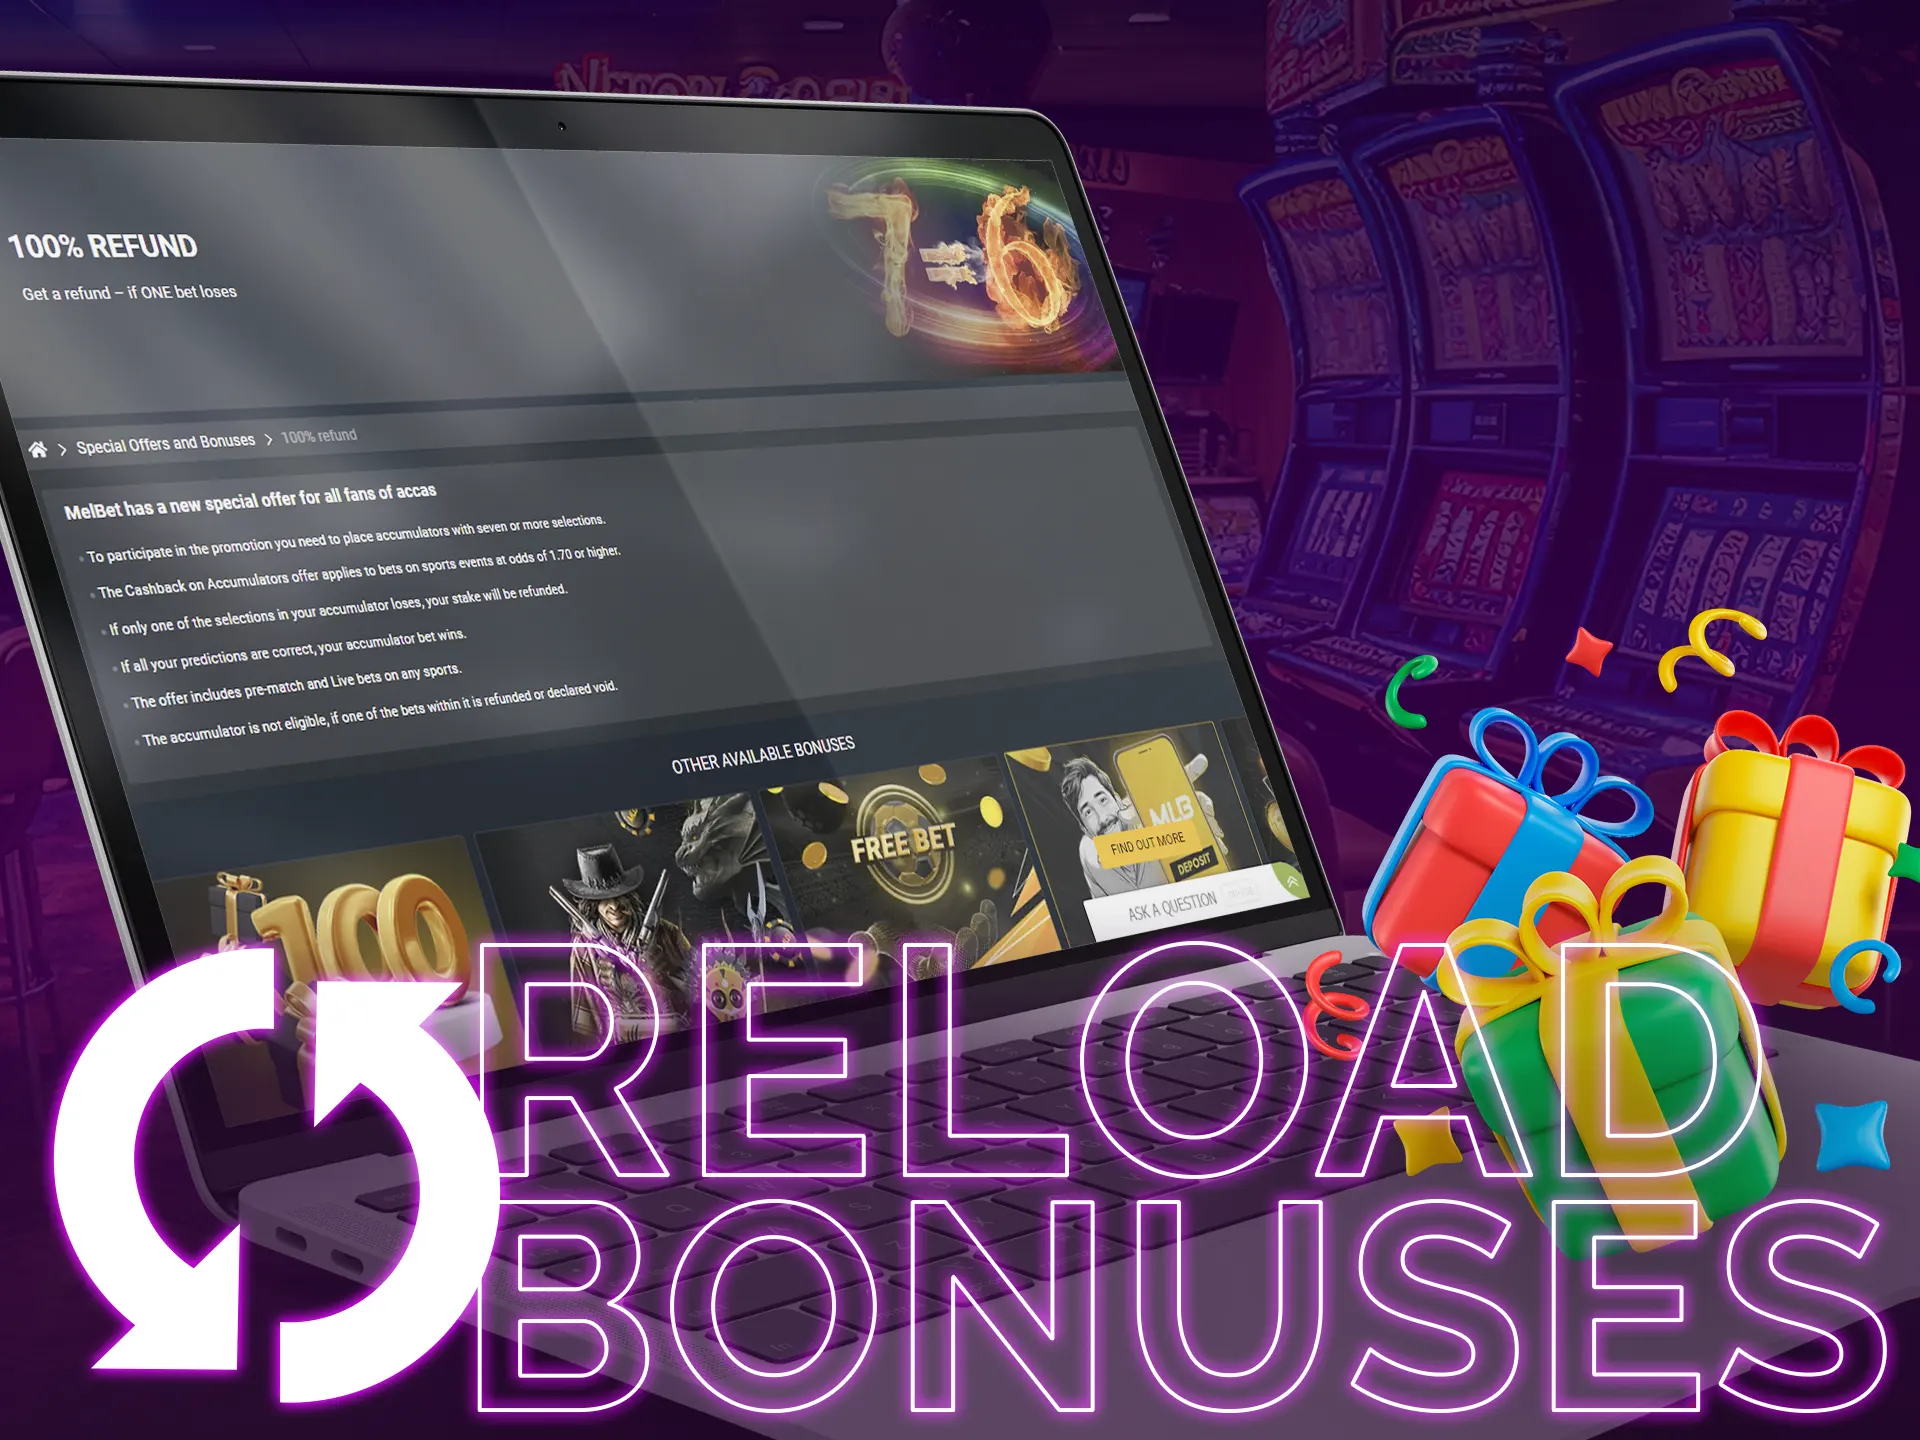 Reload bonuses benefit current players, boosting their bankrolls for extended gameplay, especially for frequent depositors.